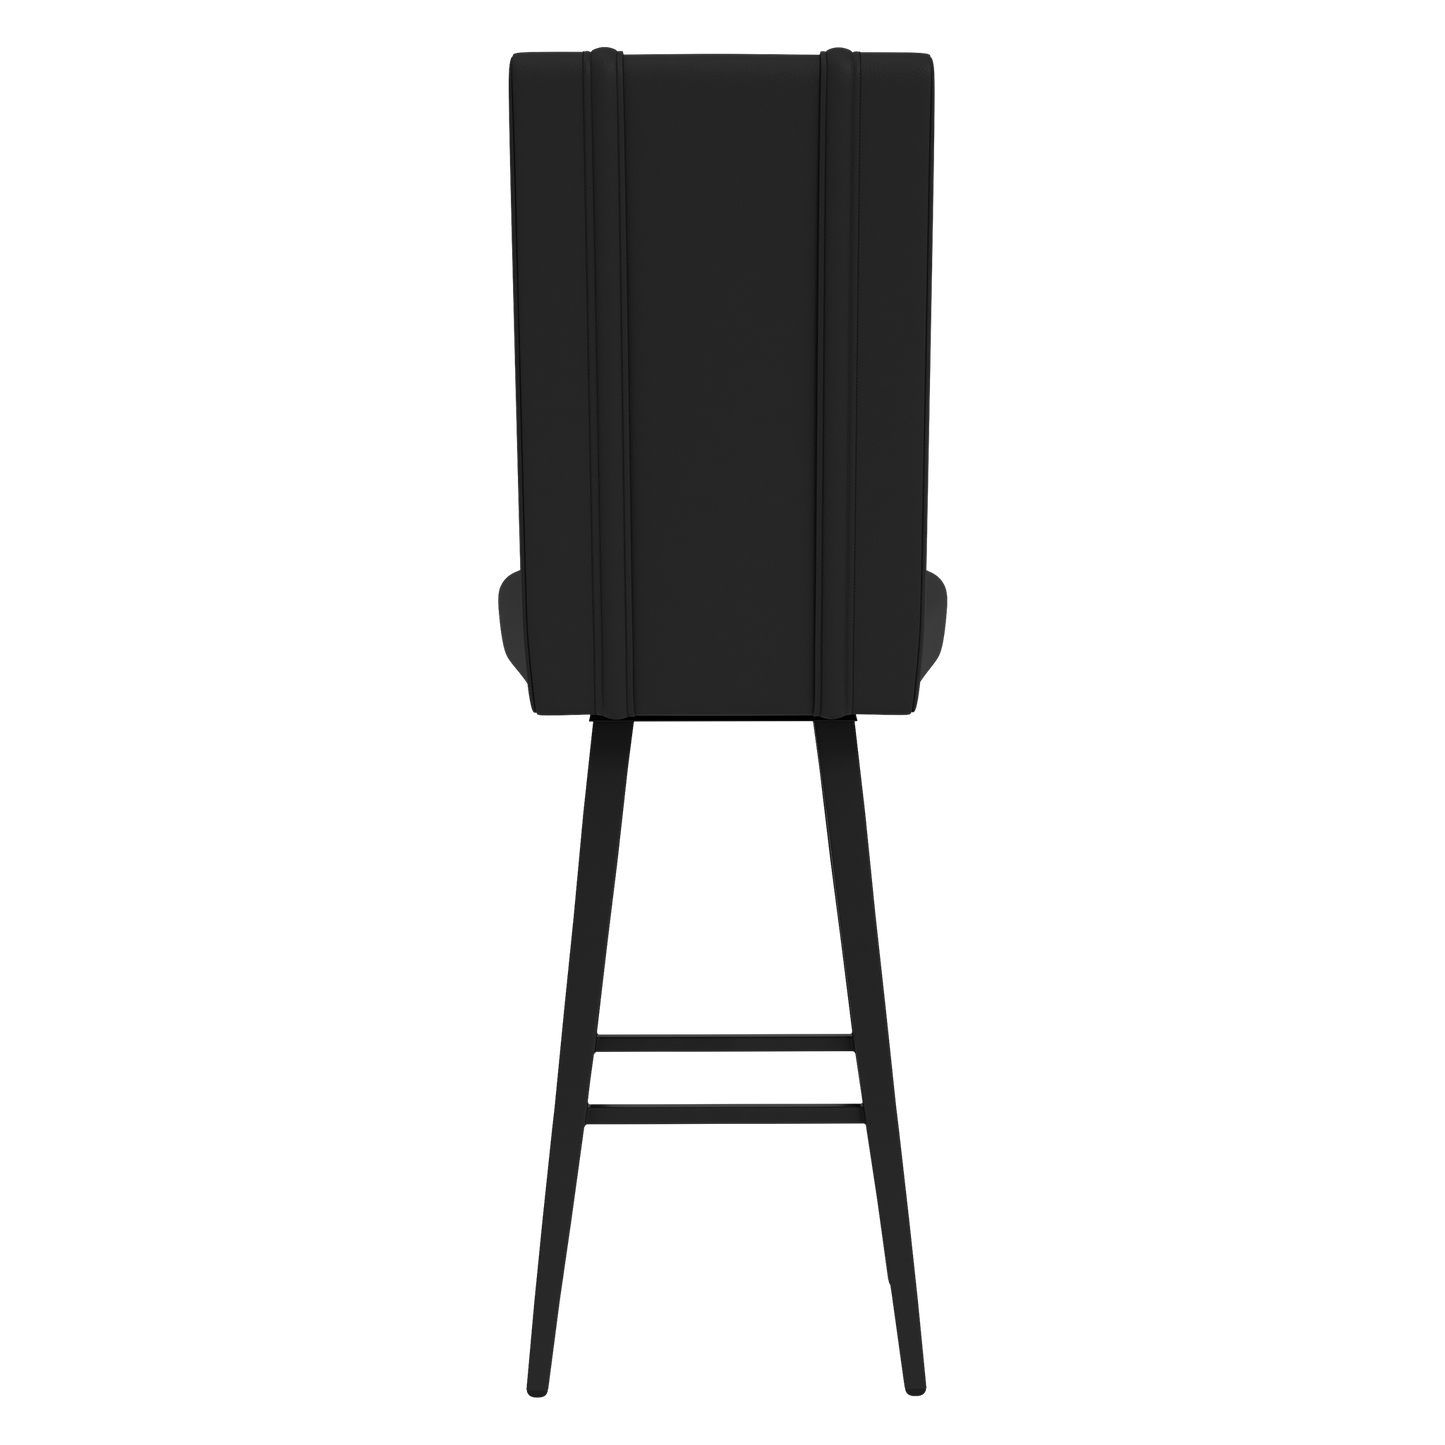 Swivel Bar Stool 2000 with Chicago Cubs Cooperstown Primary